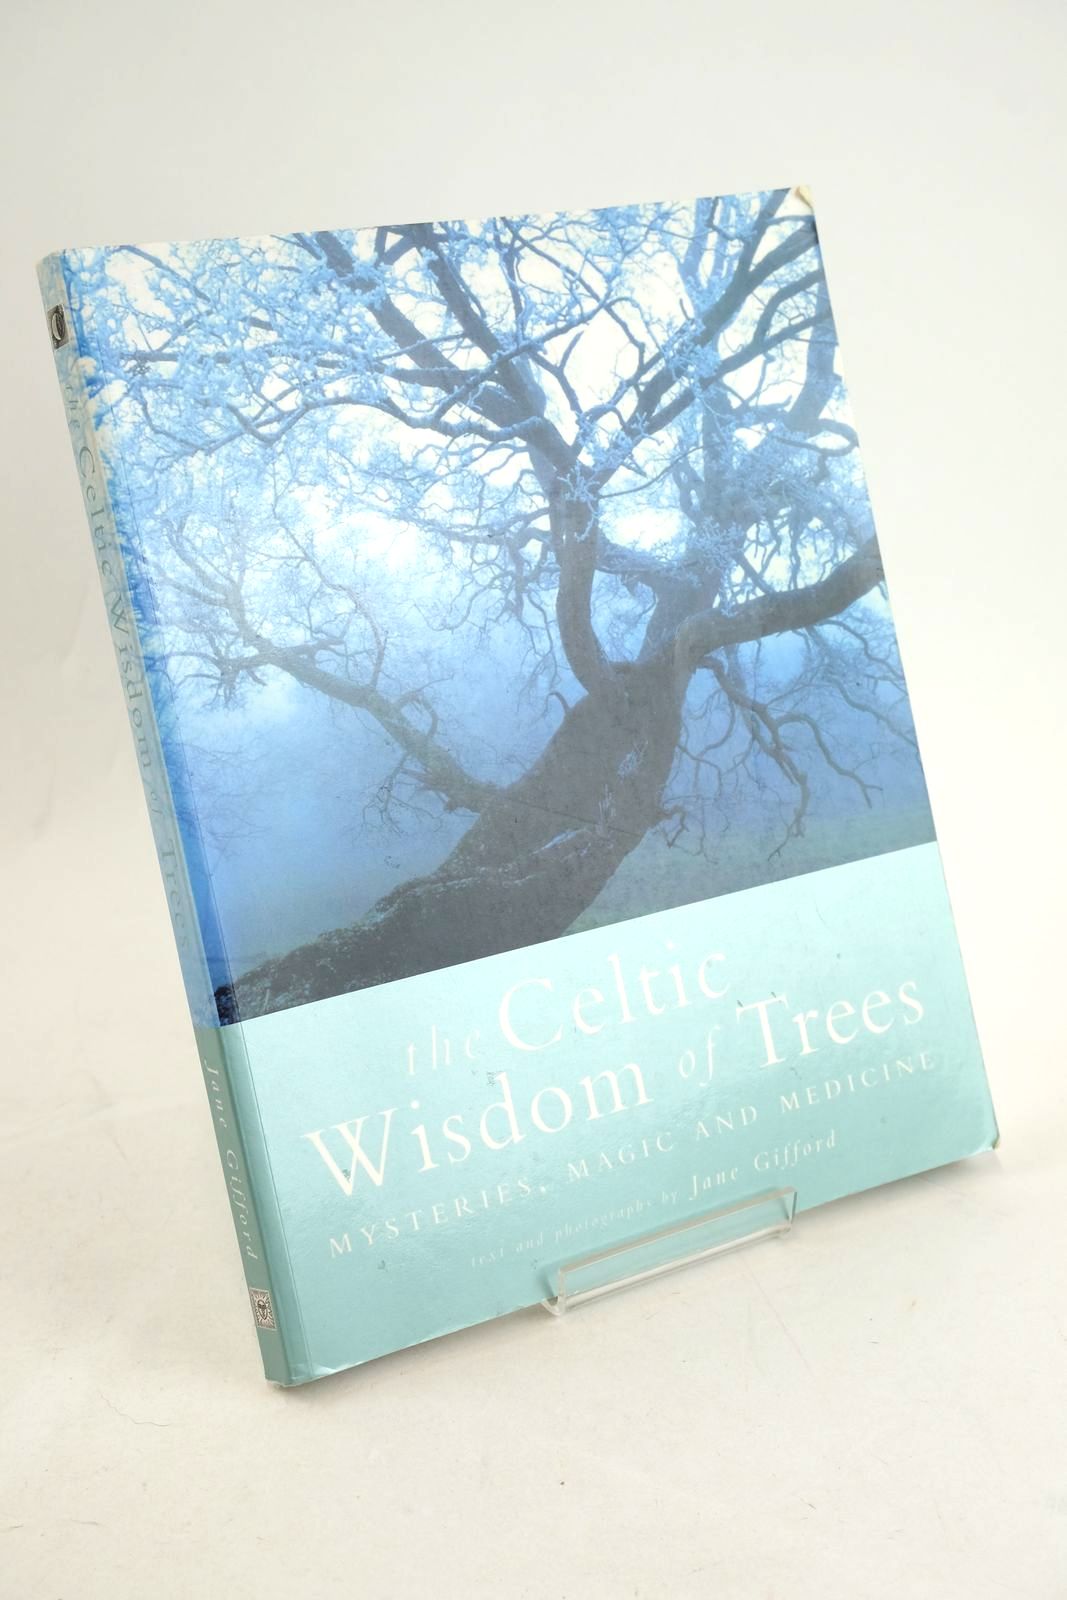 Photo of THE CELTIC WISDOM OF TREES: MYSTERIES, MAGIC, AND MEDICINE written by Gifford, Jane illustrated by Gifford, Jane published by Godsfield Press (STOCK CODE: 1327478)  for sale by Stella & Rose's Books